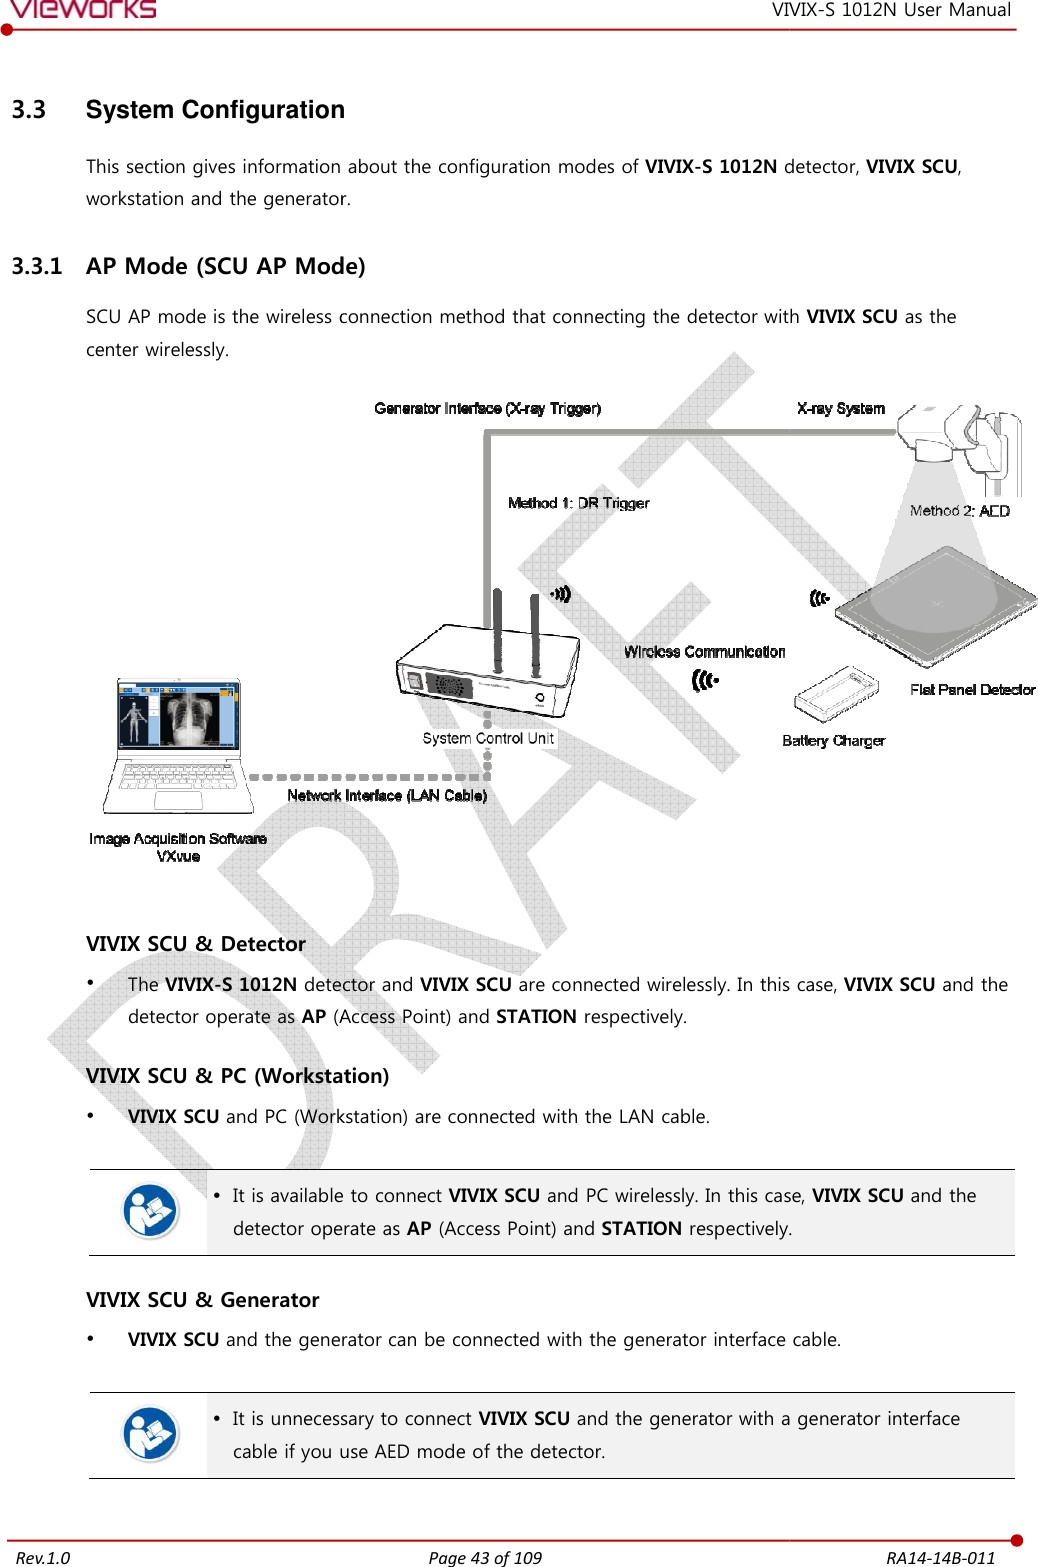   Rev.1.0 3.3 System ConfigurationThis section gives information about workstation and the generator.3.3.1 AP Mode (SCU AP Mode)SCU AP mode is the wireless connectioncenter wirelessly.    VIVIX SCU &amp; Detector  The VIVIX-S 1012N detector and detector operate as AP (Access Point) and  VIVIX SCU &amp; PC (Workstation) VIVIX SCU and PC (Workstation) are    It is availabledetector operate as  VIVIX SCU &amp; Generator  VIVIX SCU and the generator can be connected with the generator interface cable.   It is unnecessary to connect cable if you use AED mode of the detector Page 43 of 109 VIVIXSystem Configuration his section gives information about the configuration modes of VIVIX-S 1012N detector, generator. AP Mode (SCU AP Mode) connection method that connecting the detector withdetector and VIVIX SCU are connected wirelessly. In this case, (Access Point) and STATION respectively. VIVIX SCU &amp; PC (Workstation) and PC (Workstation) are connected with the LAN cable. available to connect VIVIX SCU and PC wirelessly. In this case, detector operate as AP (Access Point) and STATION respectively.generator can be connected with the generator interface cable.It is unnecessary to connect VIVIX SCU and the generator with a you use AED mode of the detector. RA14-14B-011 VIX-S 1012N User Manual detector, VIVIX SCU, with VIVIX SCU as the  In this case, VIVIX SCU and the n this case, VIVIX SCU and the . generator can be connected with the generator interface cable. a generator interface 